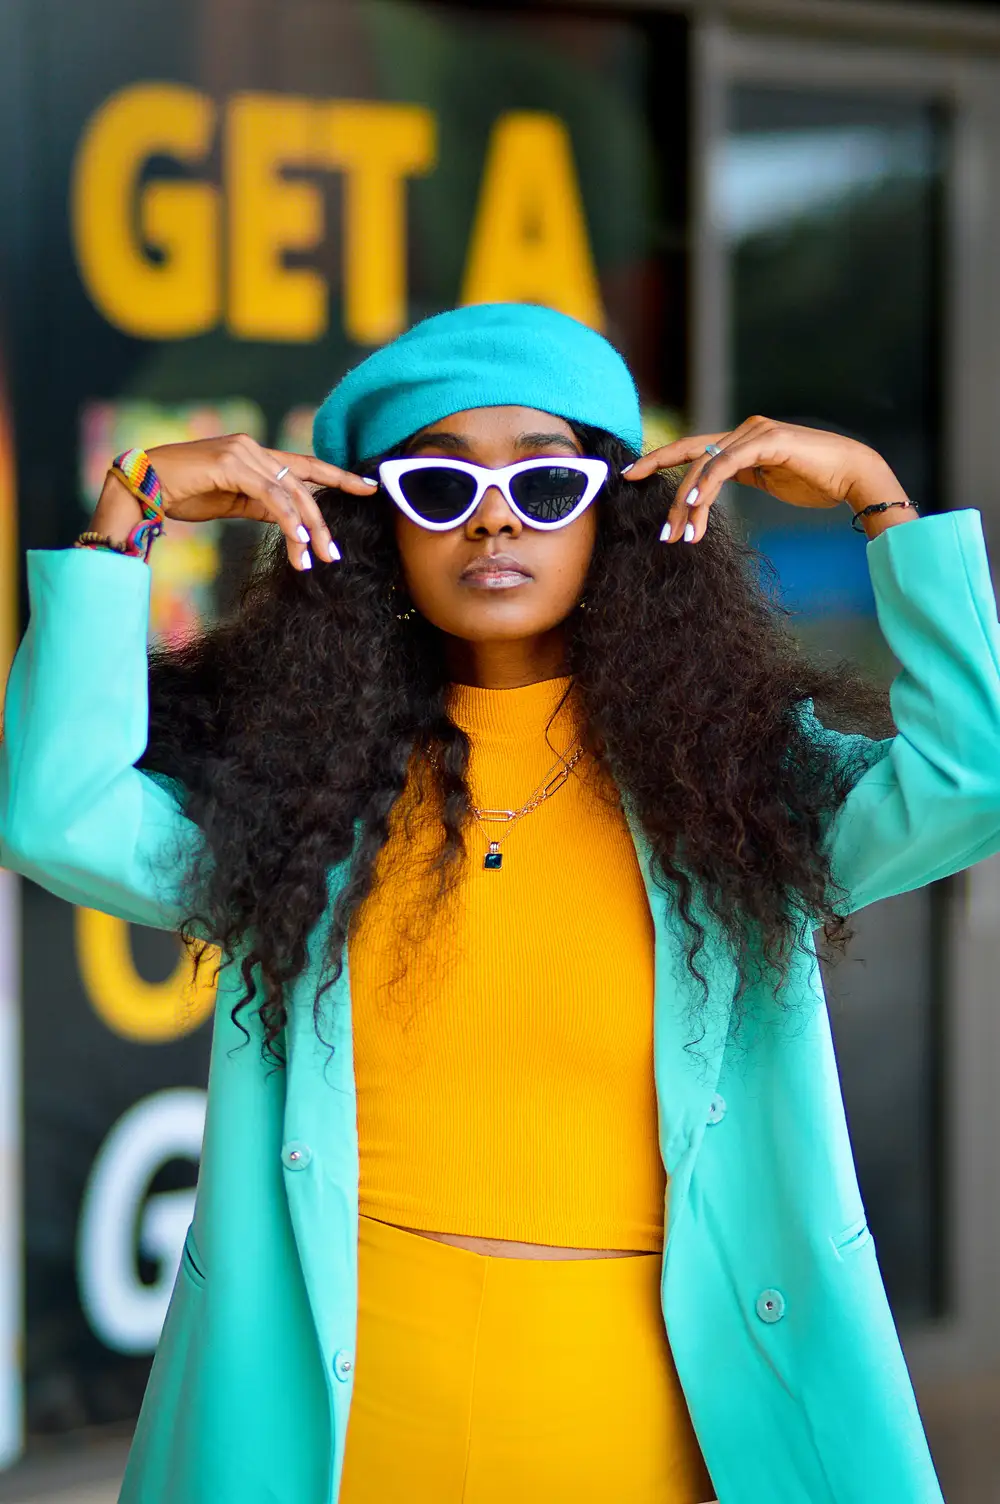 Stylish woman wearing coloured outfit.